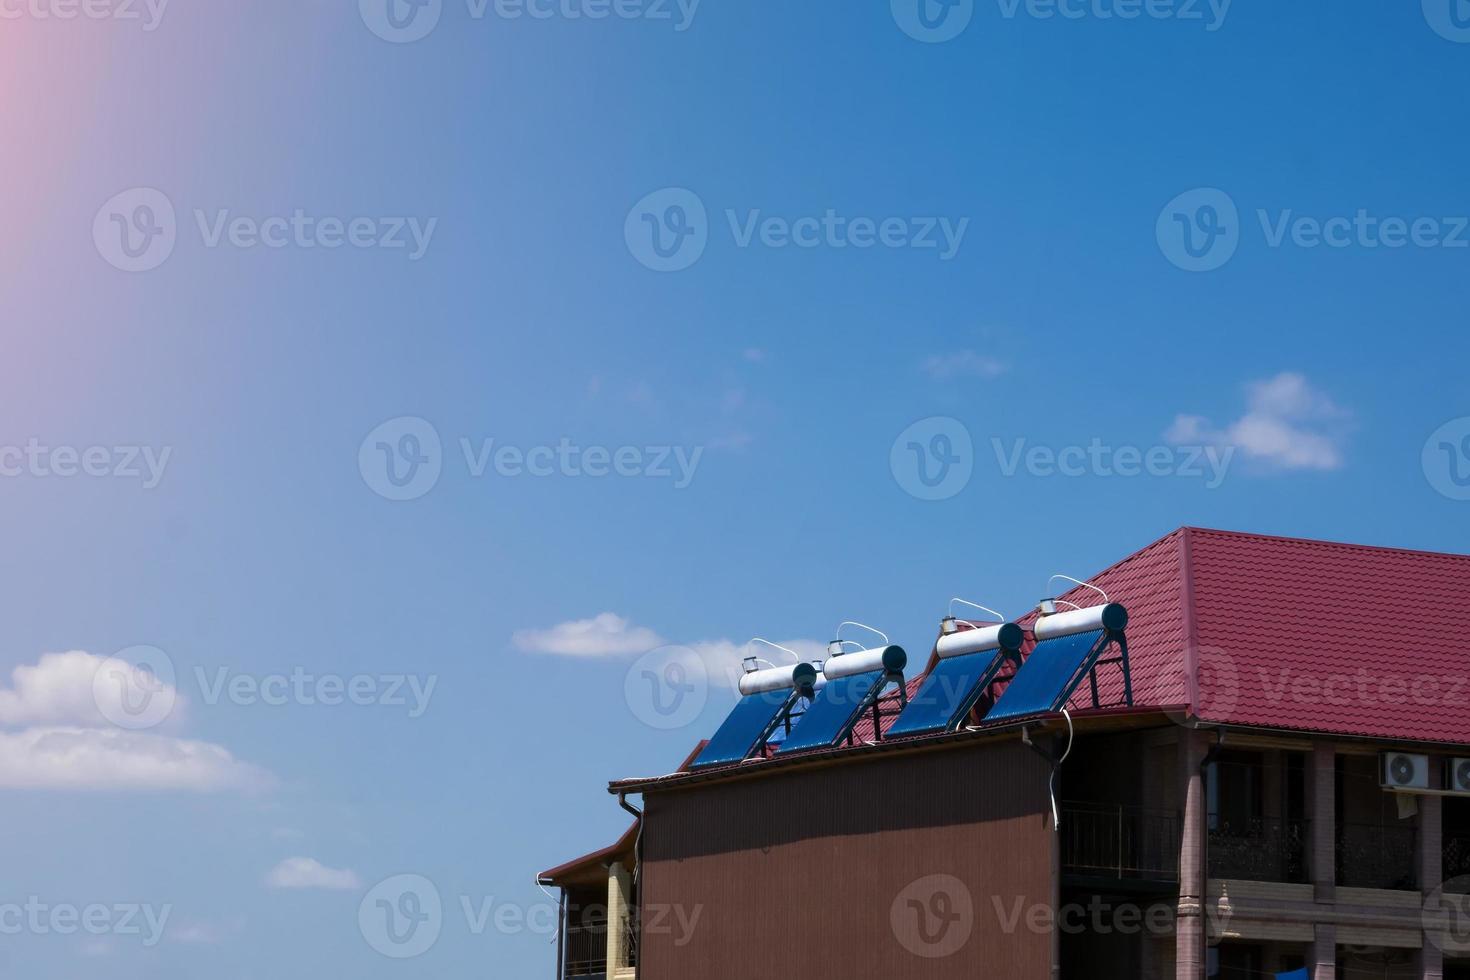 solar water heaters on the roof, free energy photo